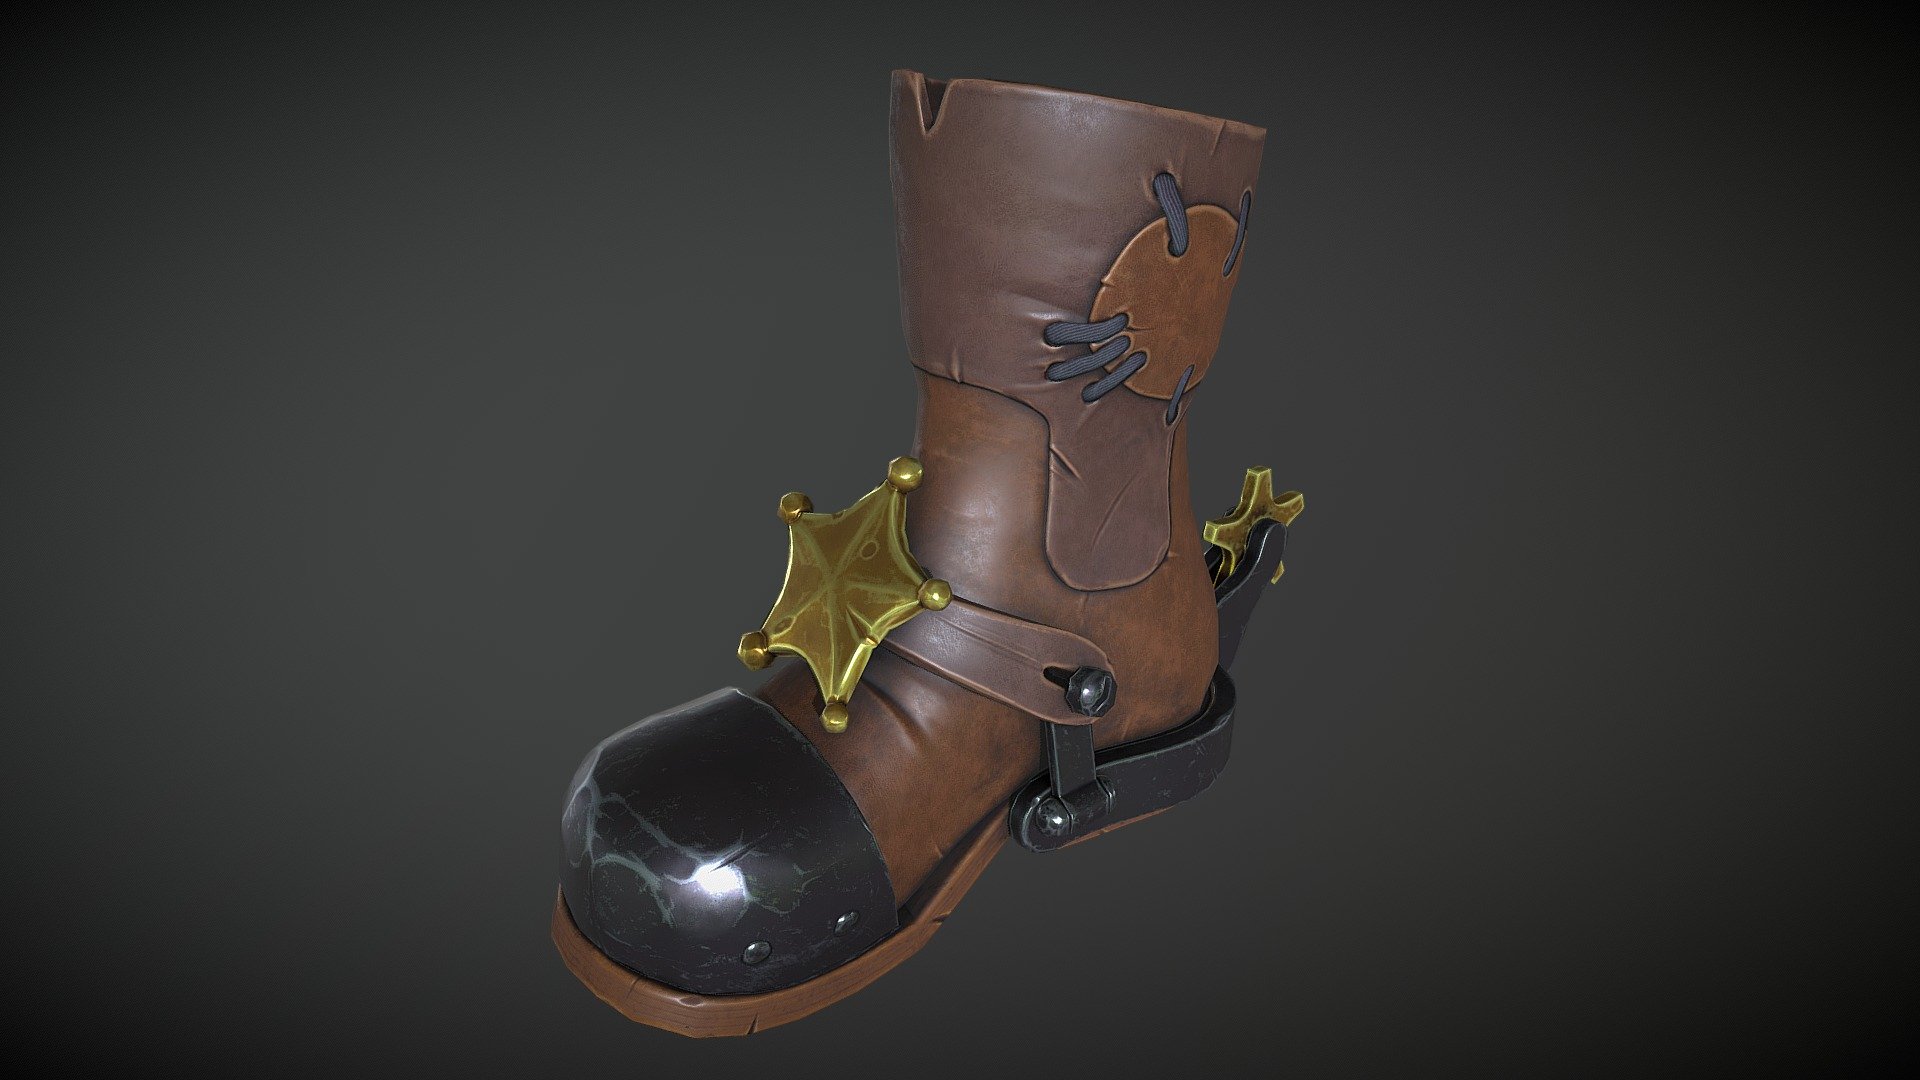 Sheriff's boots
I lied. There only one boot. Another one stylization test.
Modelled in Blender, sculpted in Zbrush. Textured in Substance Painter 3d model